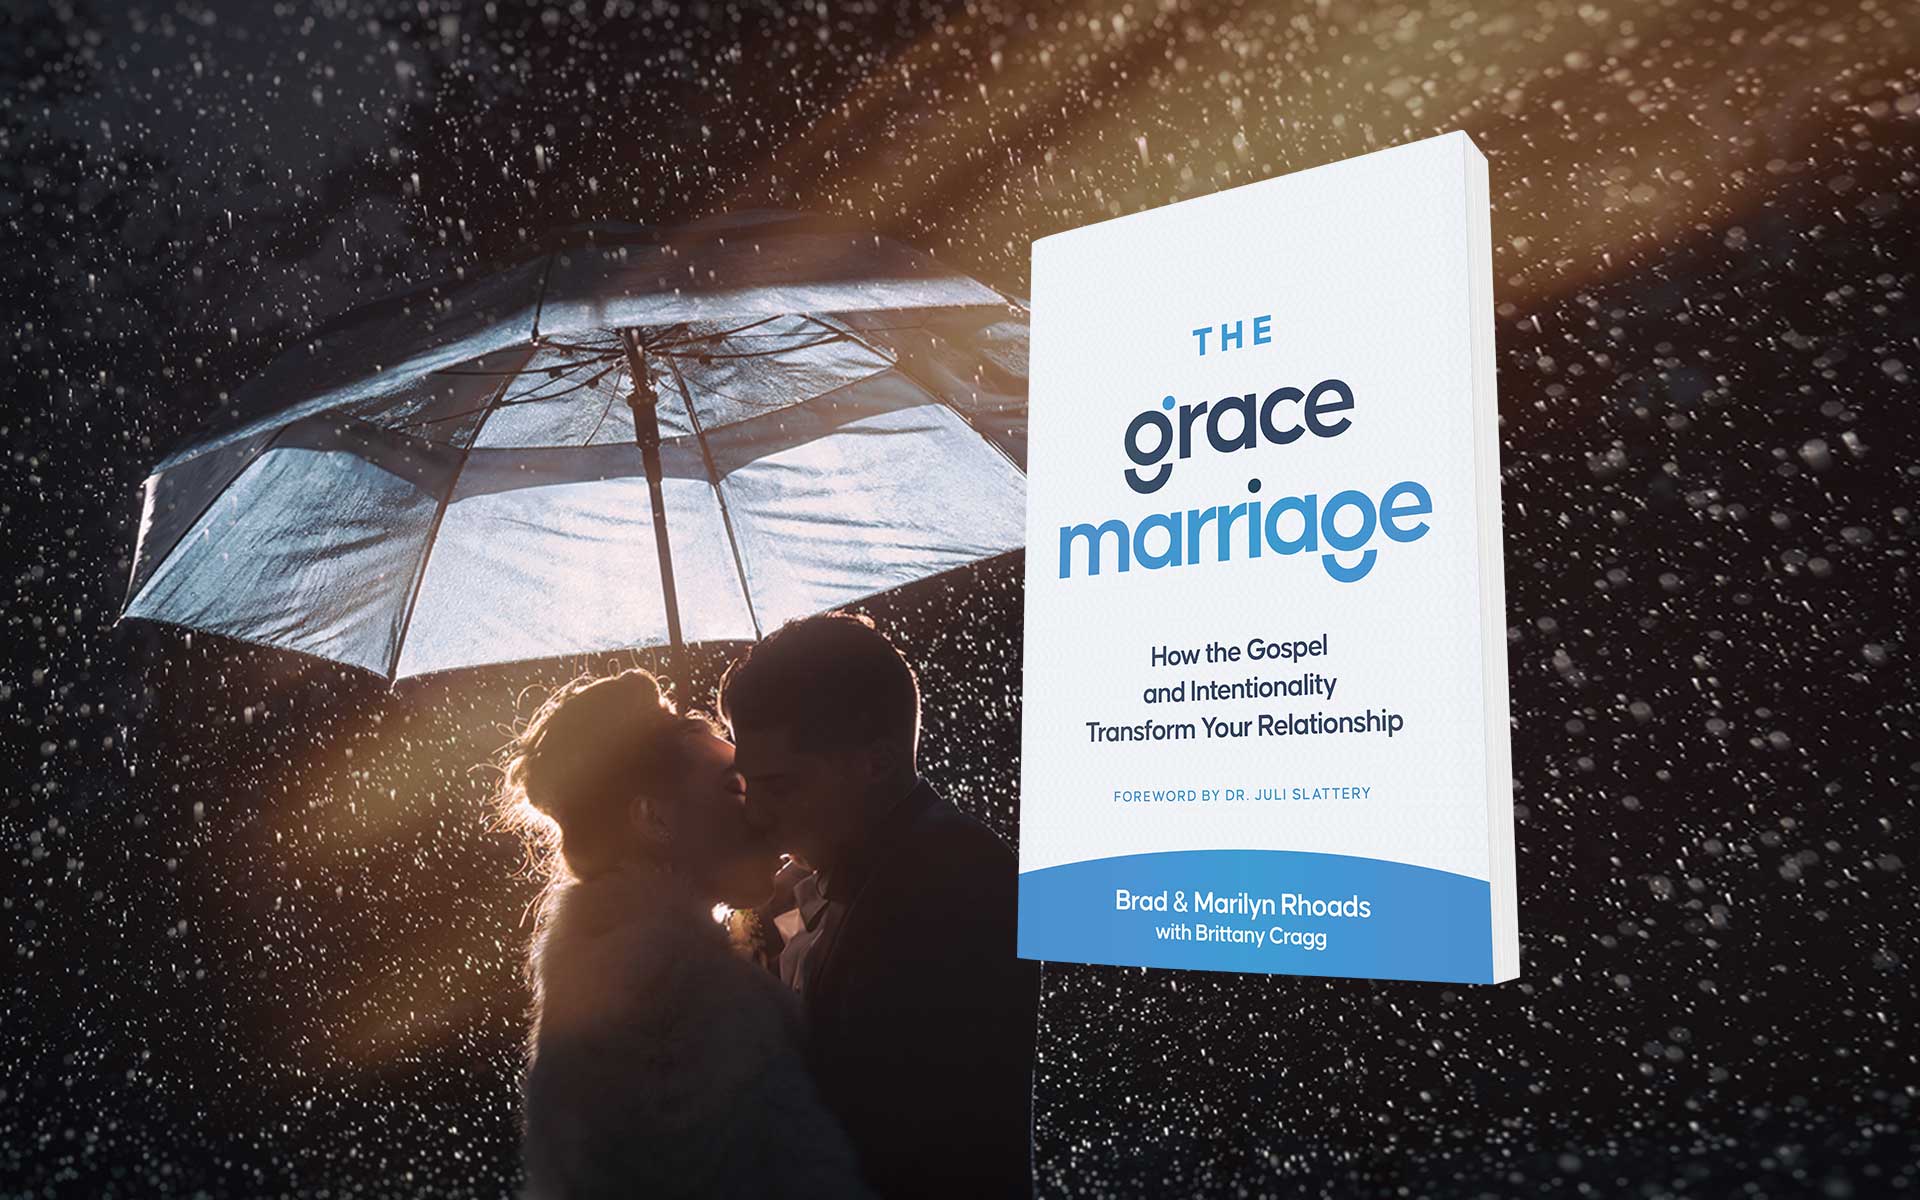 Finding True Love in a Grace Based Marriage - Part 2